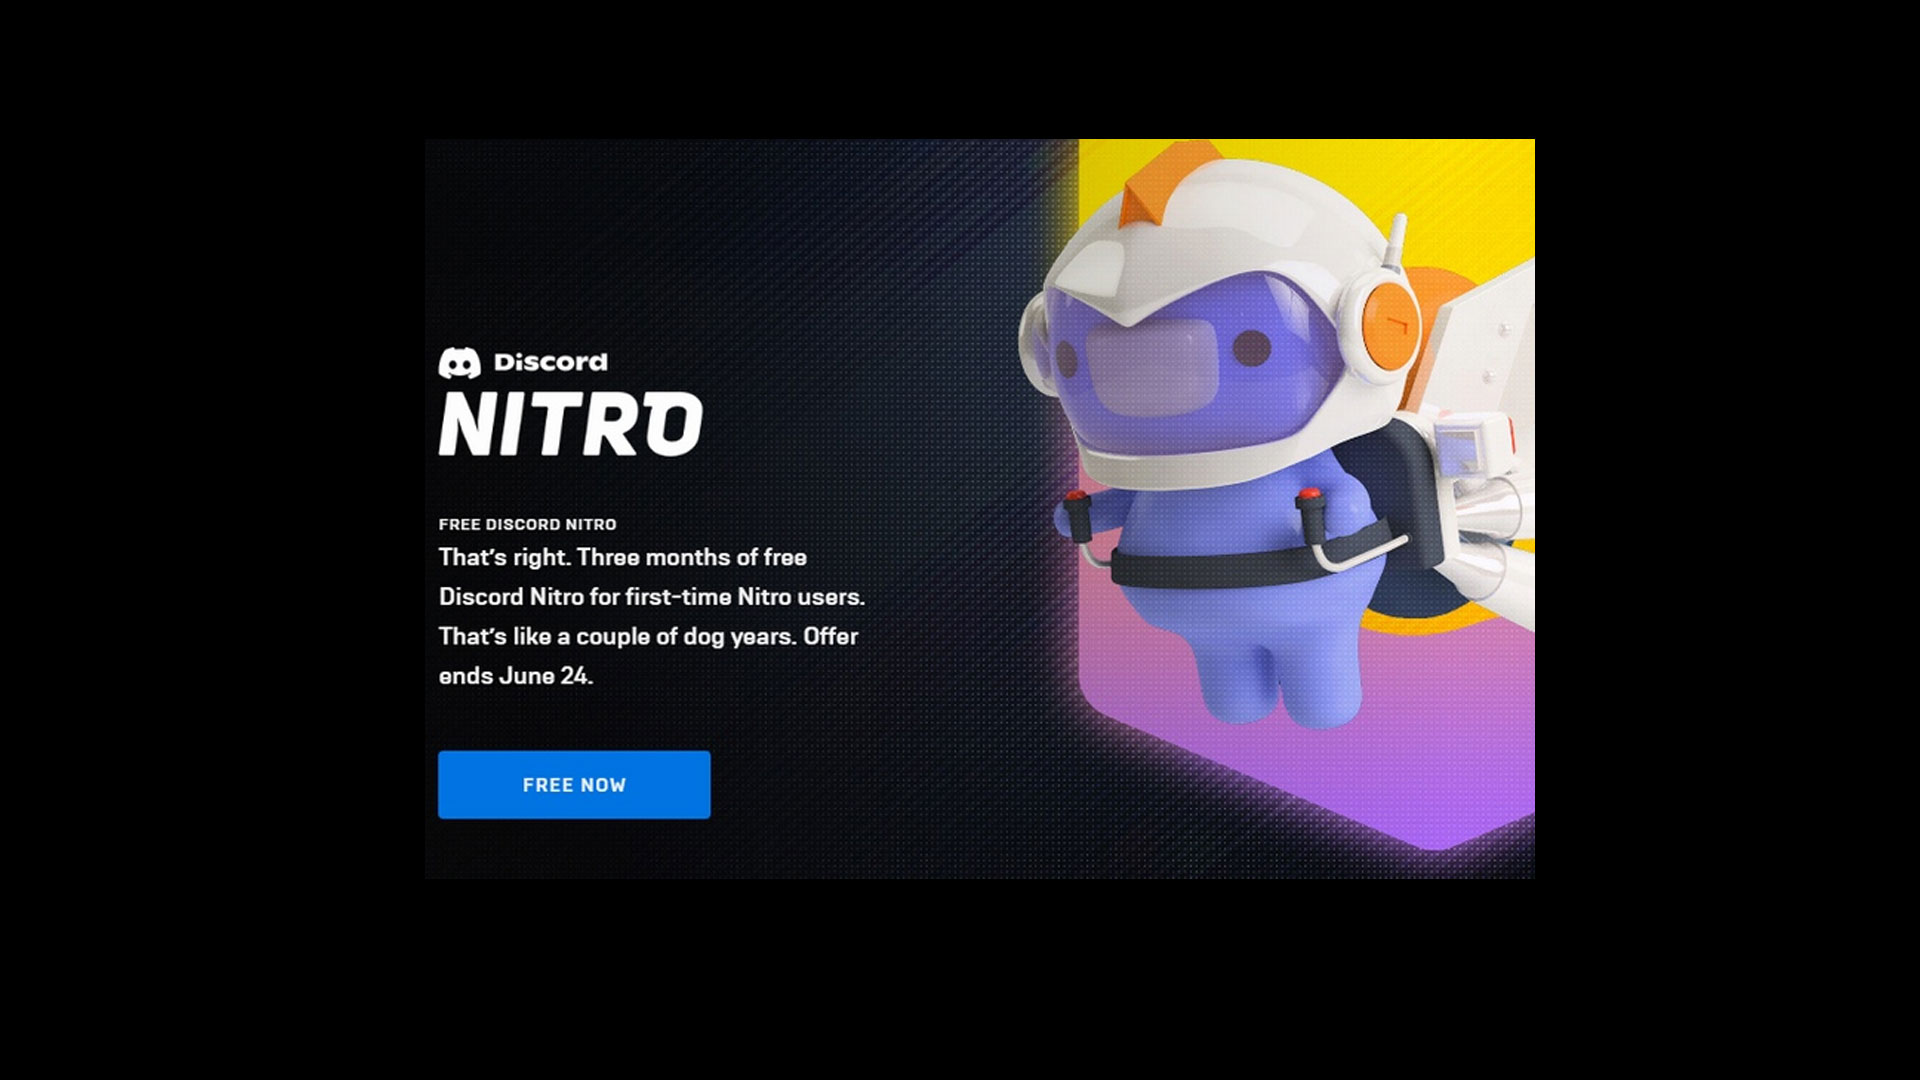 How to Get Free Discord Nitro on Epic Games Store?